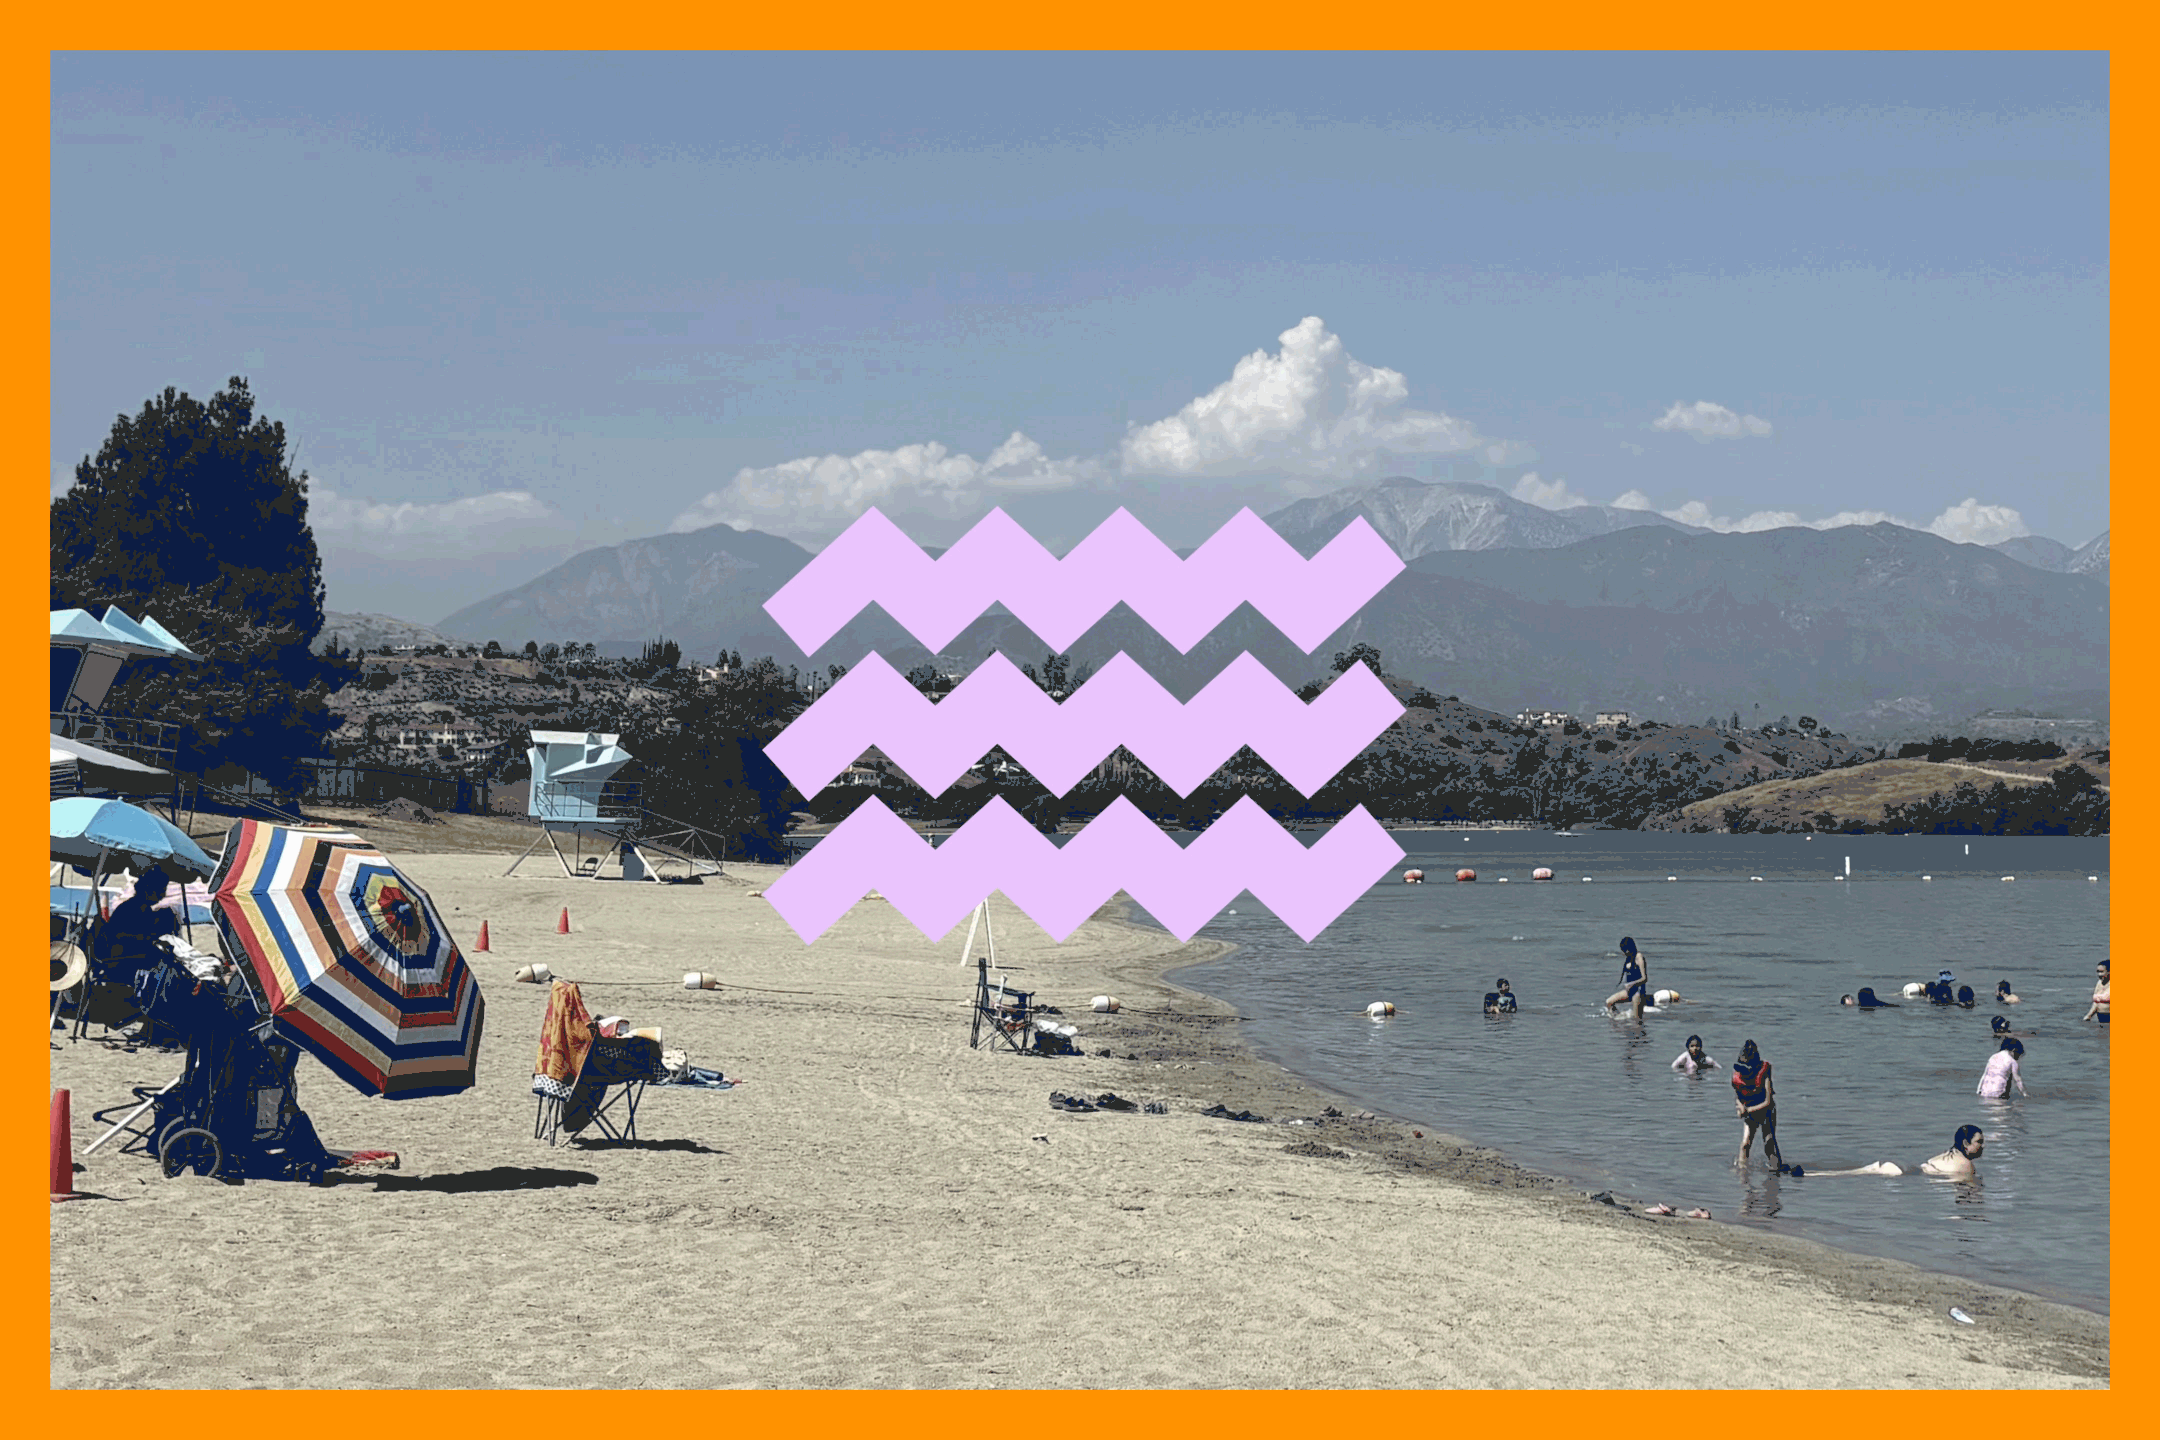 An animated zigzag pattern is overlaid on a photo of a beach.